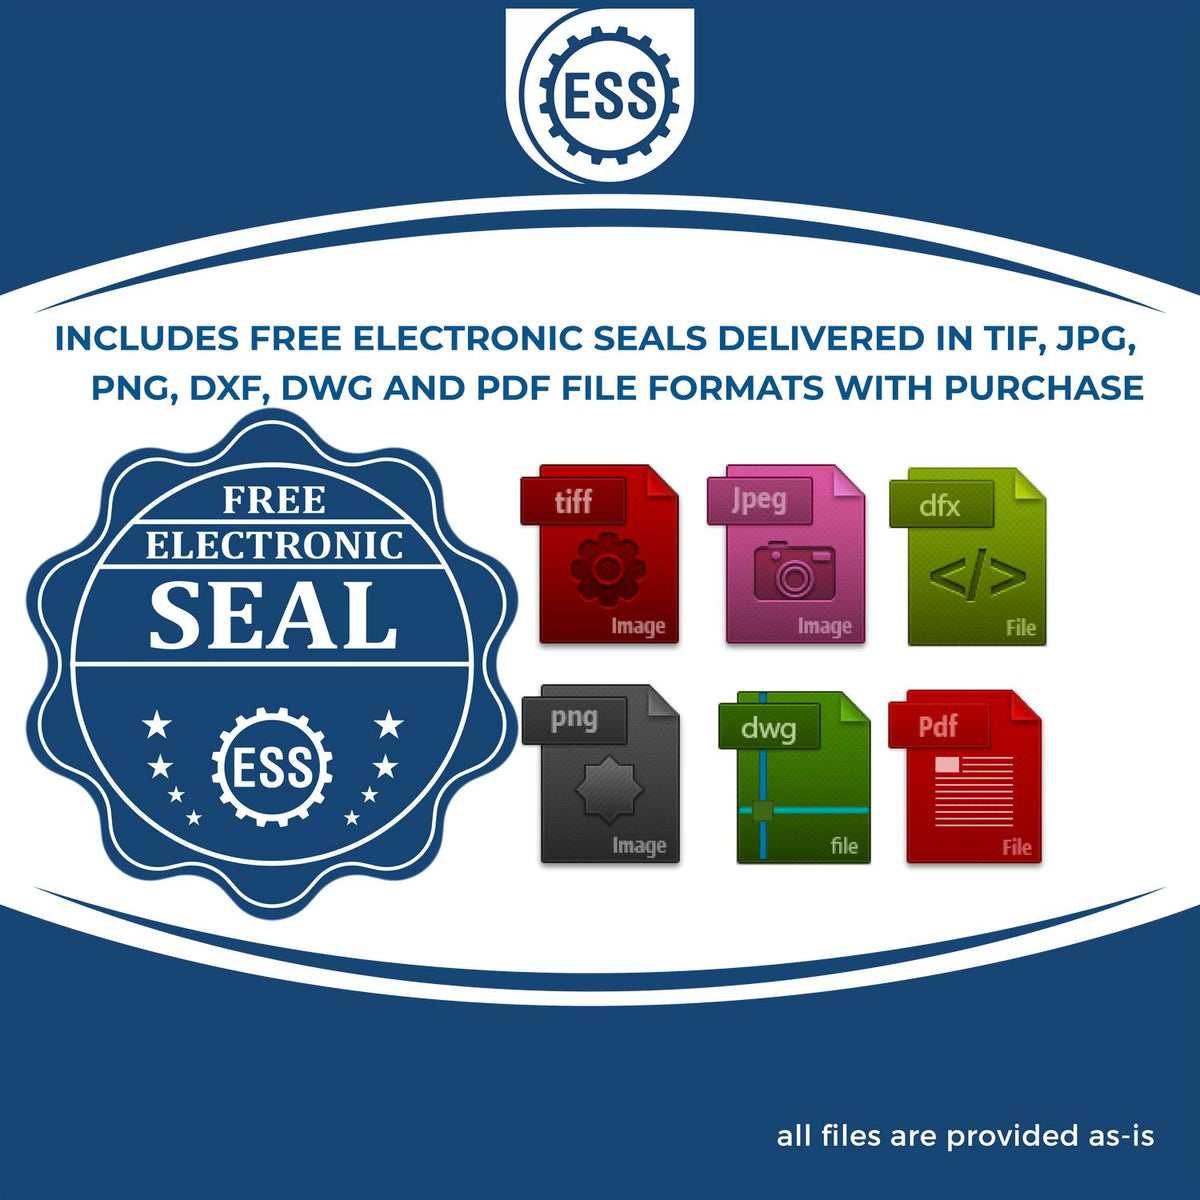 An infographic for the free electronic seal for the Gift Michigan Landscape Architect Seal illustrating the different file type icons such as DXF, DWG, TIF, JPG and PNG.